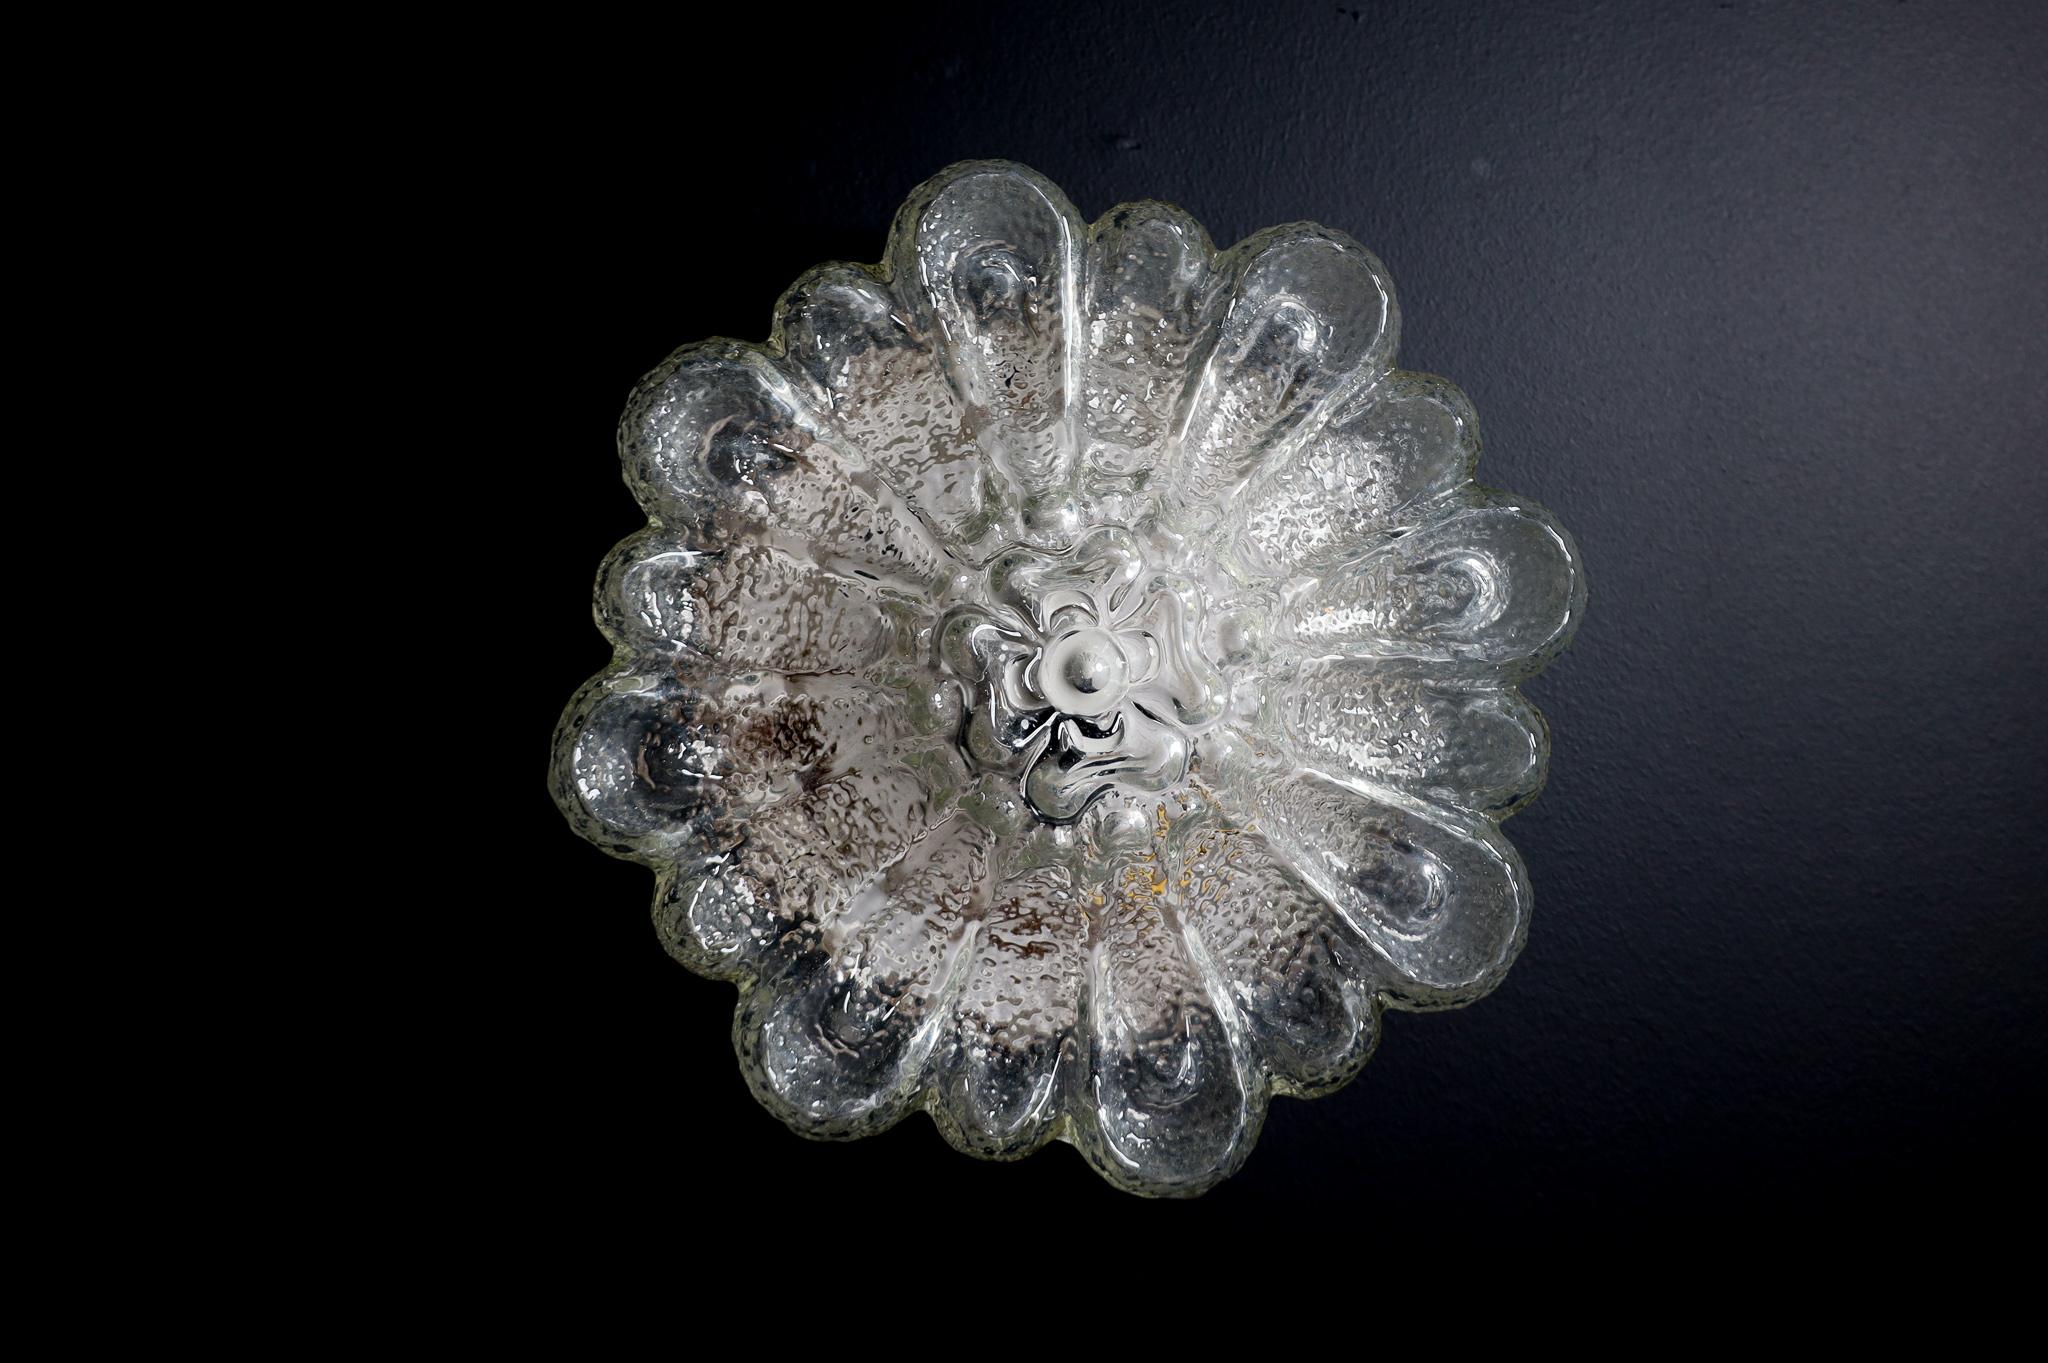 Floral shape flush mount or wall light Germany 1960s.

Floral shape flush mount ceiling light or wall light made of heavy textured clear iced glass made in Germany, 1960s. This midcentury vintage lamp illuminates beautifully, casting a warm glow